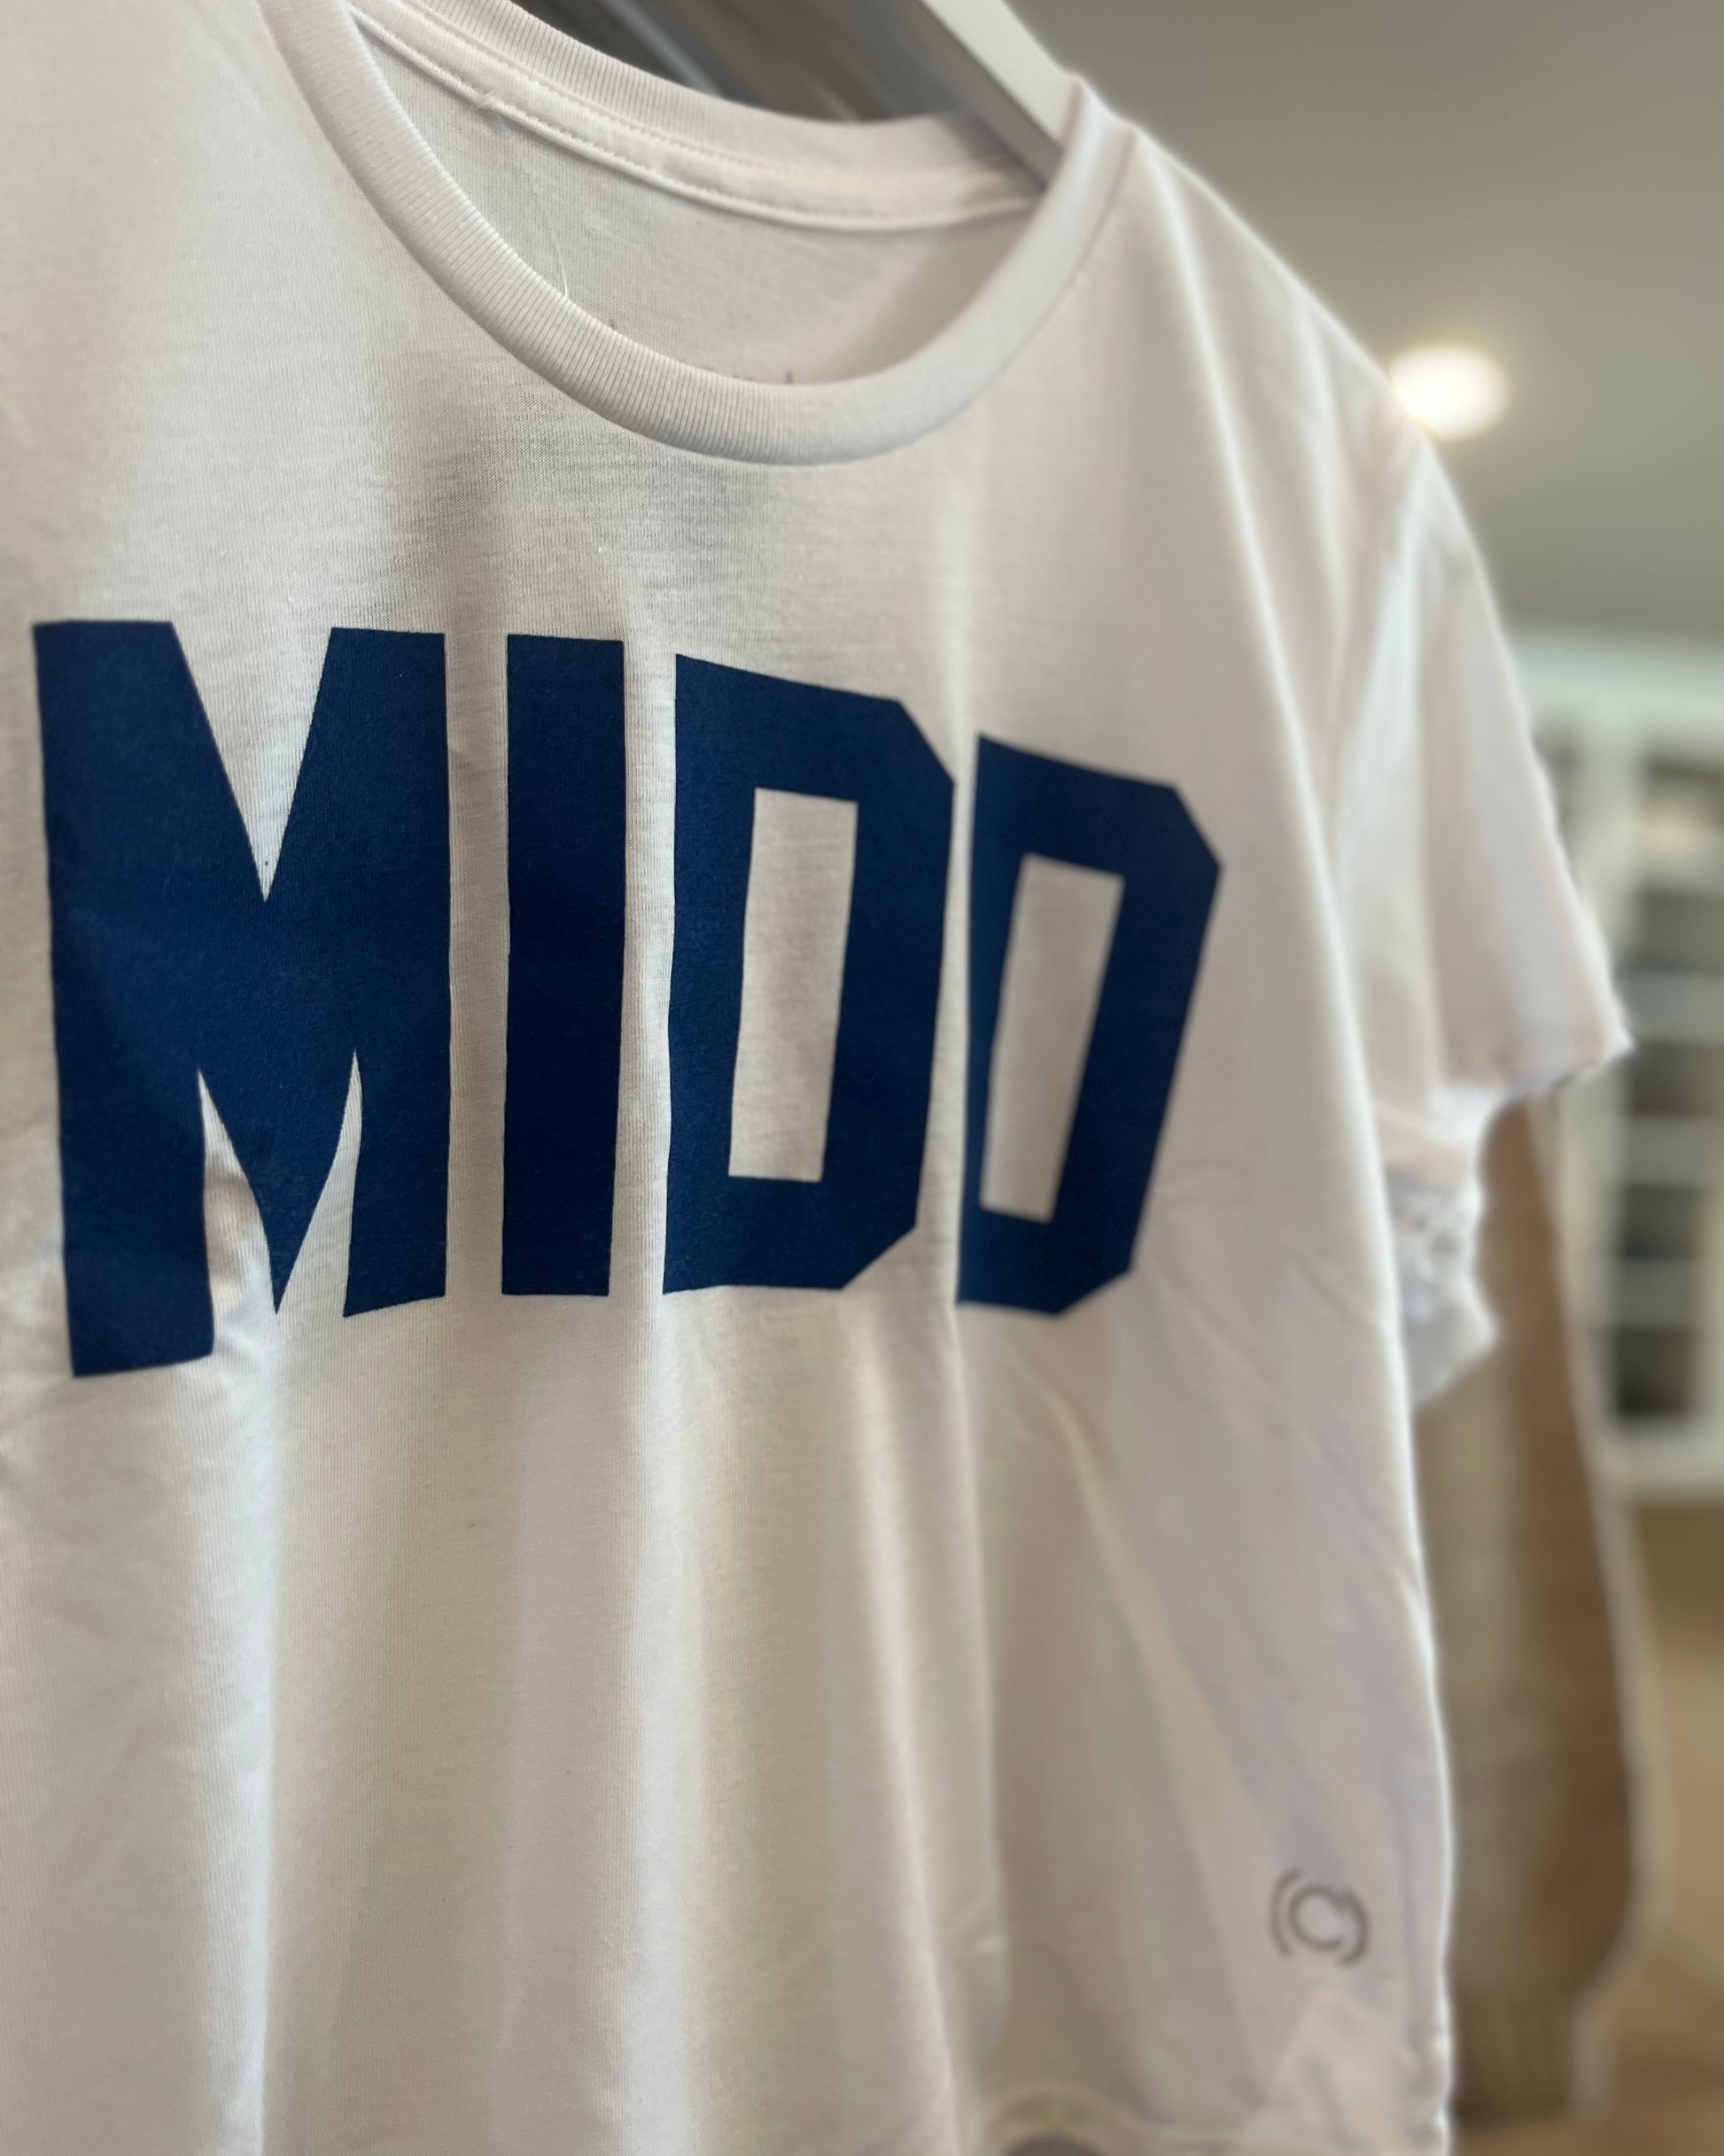 Image of MIDD "Middlebury College" Crop White Tee With Blue letters 